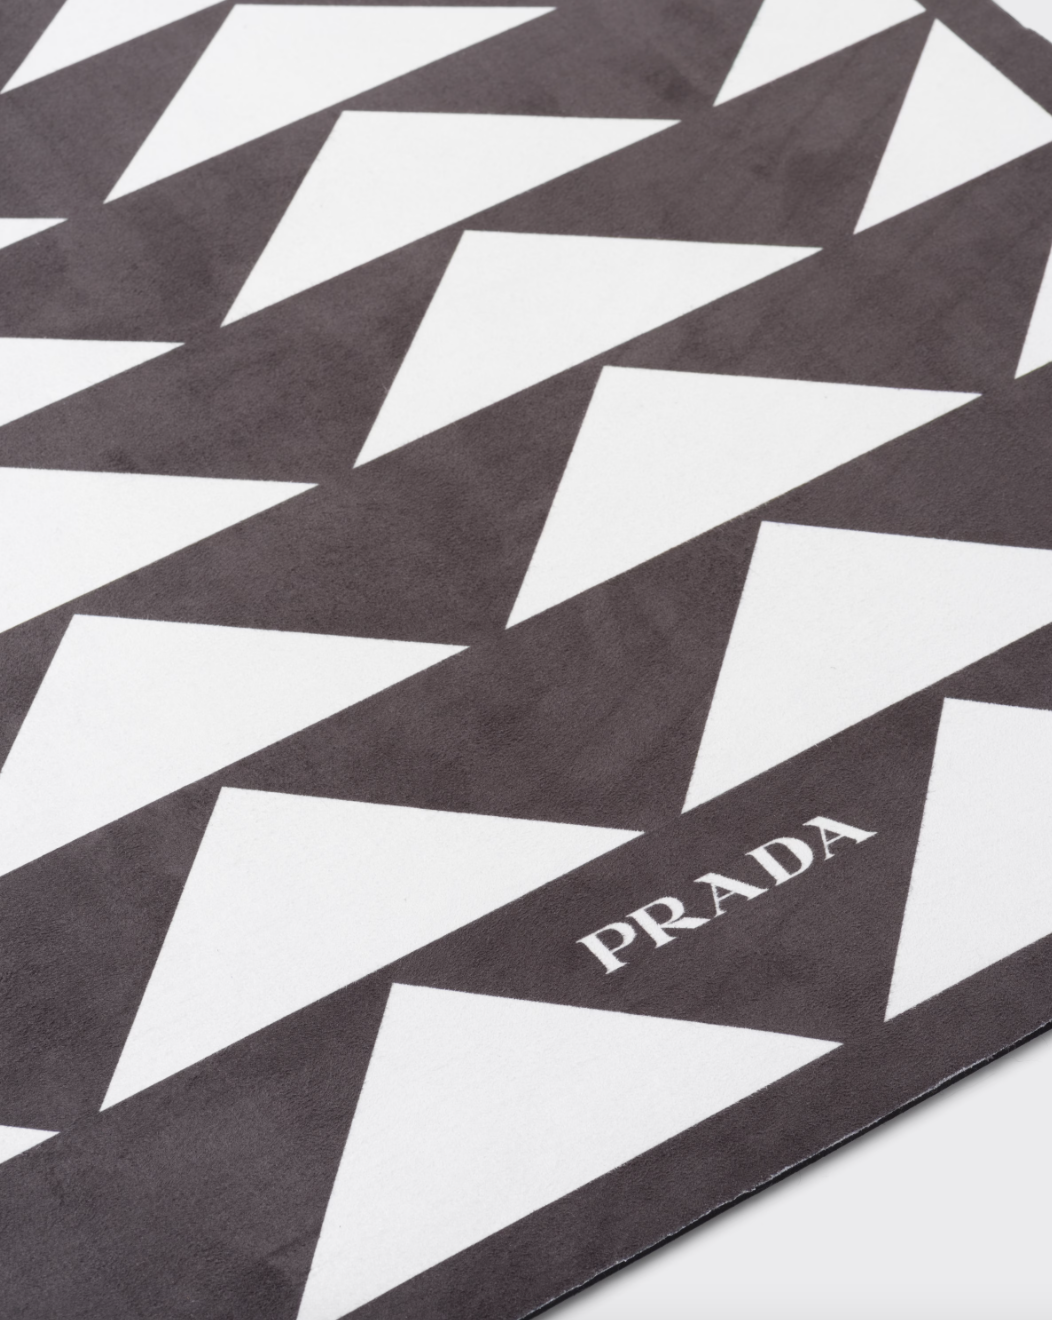 <p><strong>$2500.00</strong></p><p><a href="https://go.redirectingat.com?id=74968X1553576&url=https%3A%2F%2Fwww.prada.com%2Fus%2Fen%2Fp%2Fyoga-mat%2F2XD006_2DR3_F0964&sref=https%3A%2F%2Fwww.harpersbazaar.com%2Fbeauty%2Fdiet-fitness%2Fg45221676%2Fbest-yoga-mats%2F">Shop Now</a></p><p><em>Bazaar</em> editors consider this mat from Prada one of the <a href="https://www.harpersbazaar.com/beauty/health/g23900366/best-fitness-gifts-ideas/">best fitness gifts</a> worth giving (or receiving). Not only is the mat itself supremely stylish, but it also nicely includes a branded harness carrier and detachable shoulder strap.</p>